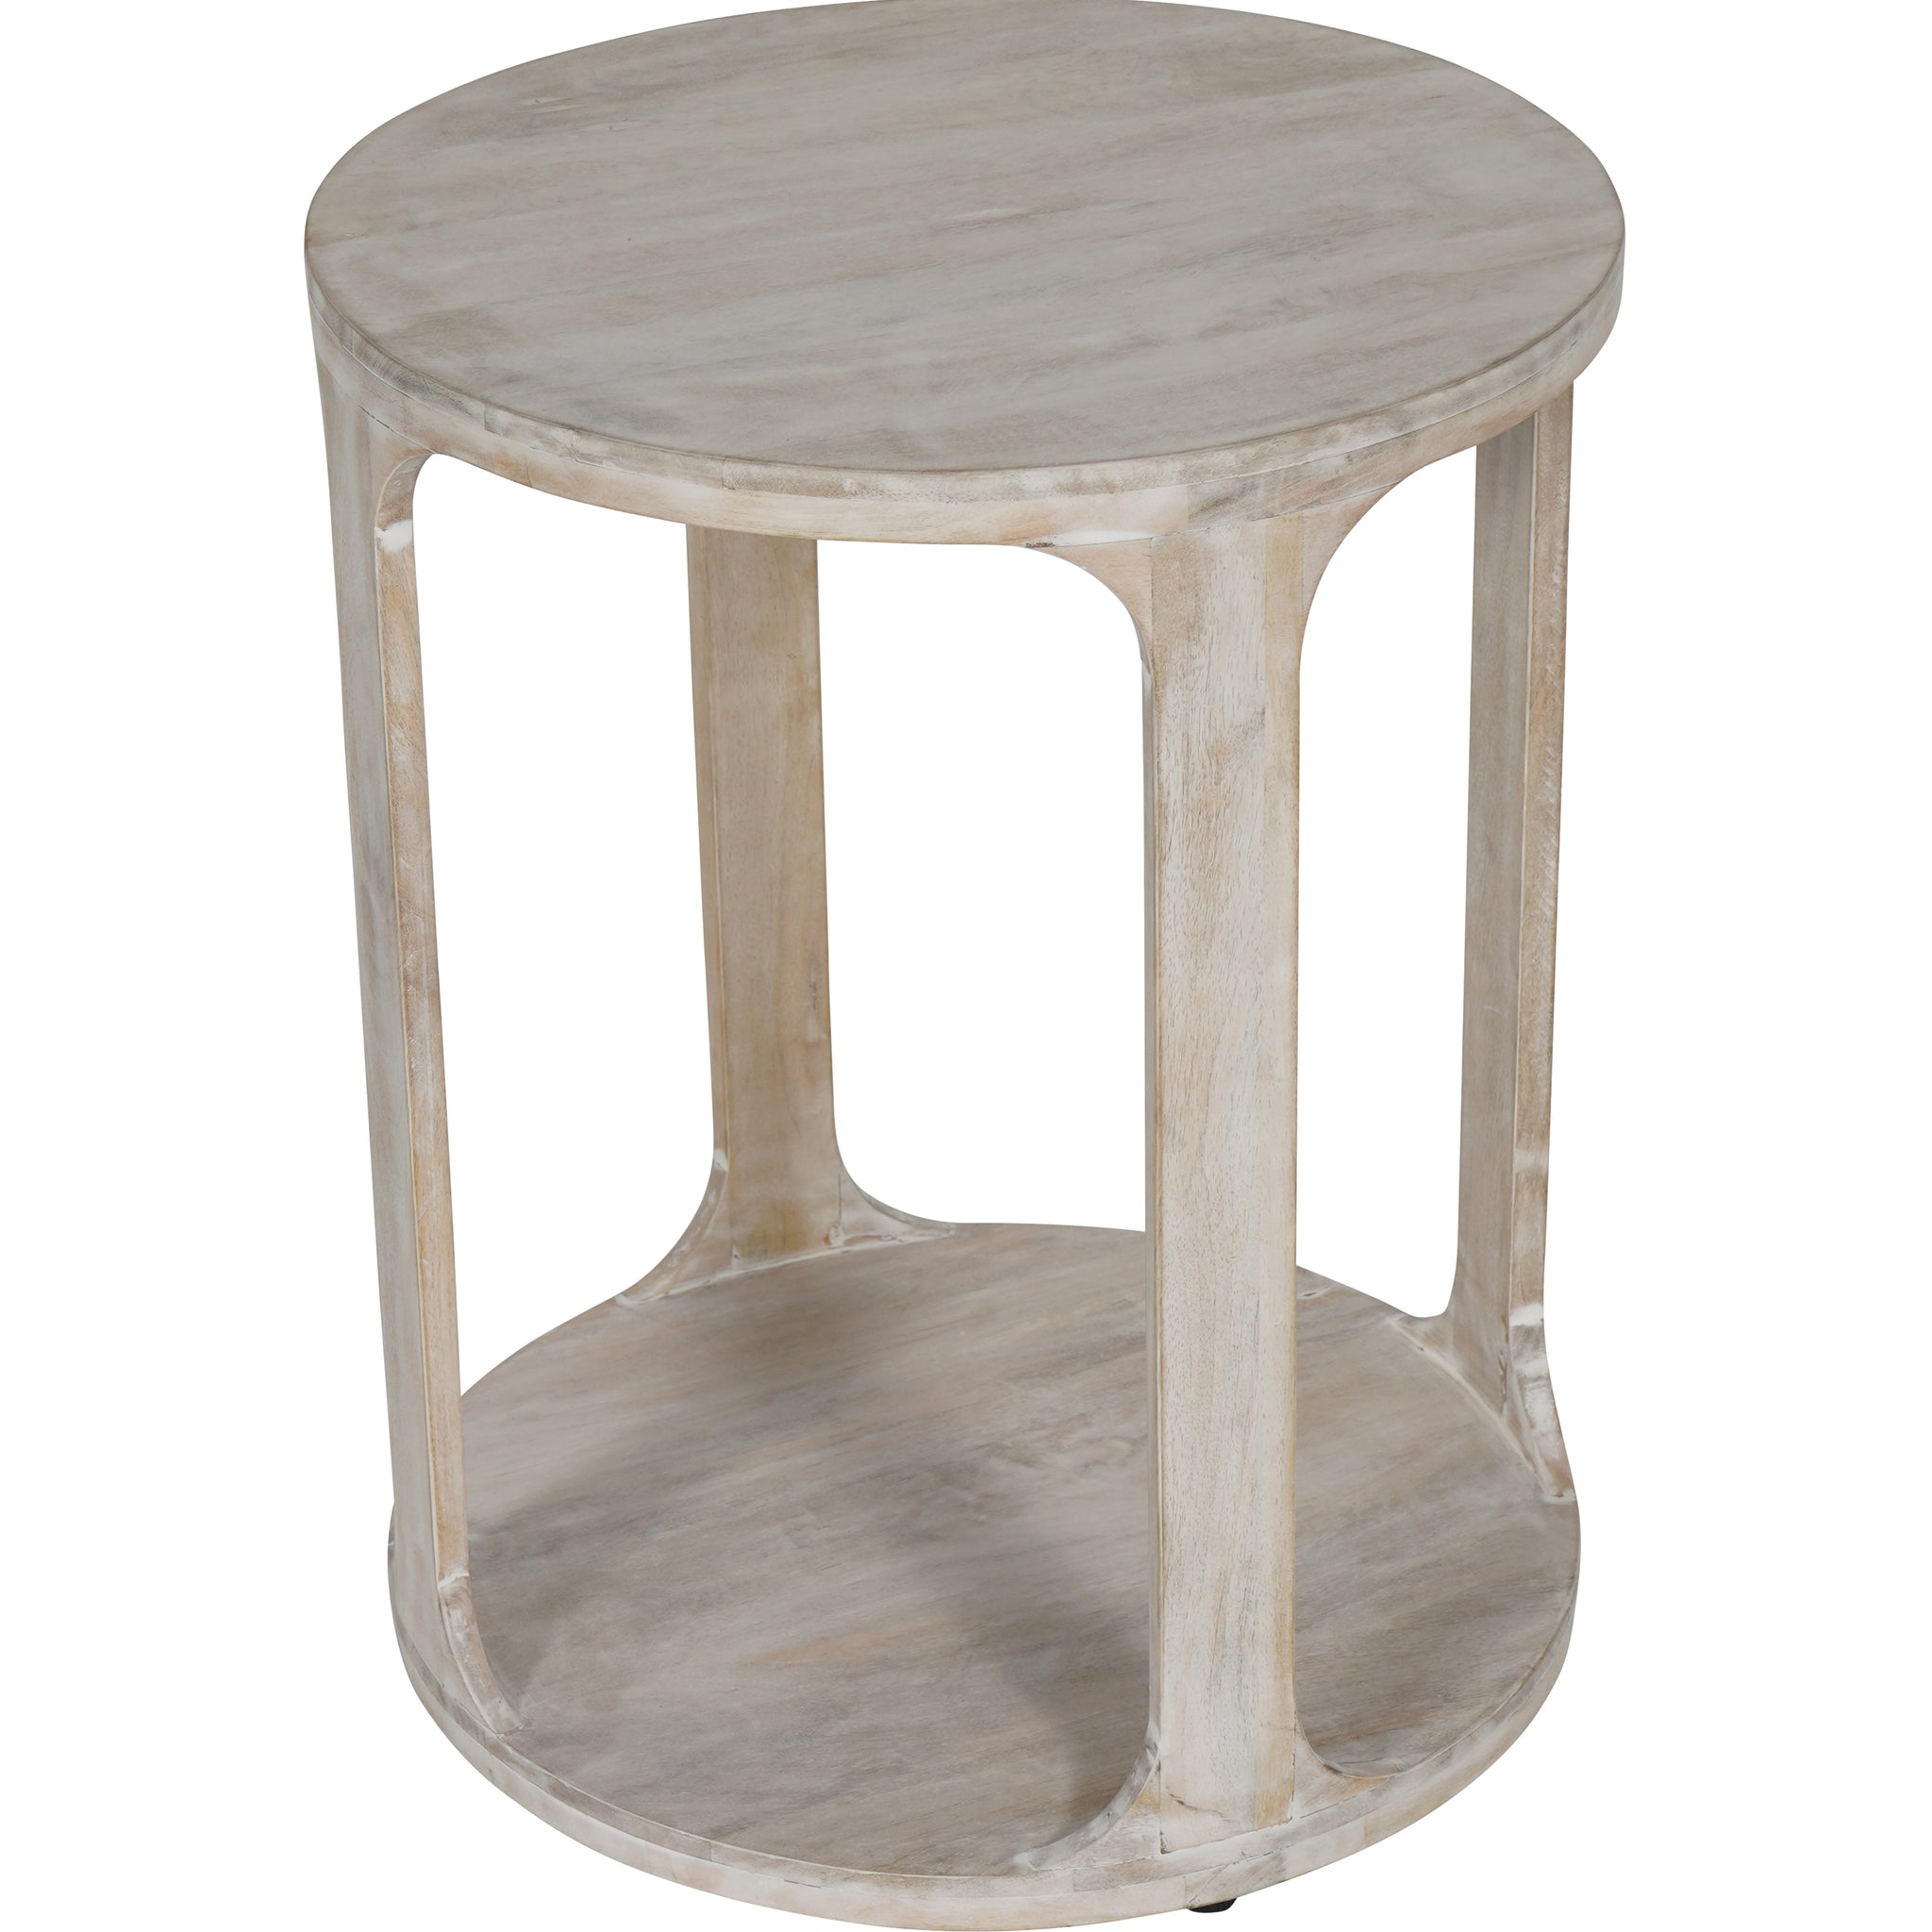 Bamburgh Solid Carved Wooden Side Table in Whitewash Finish